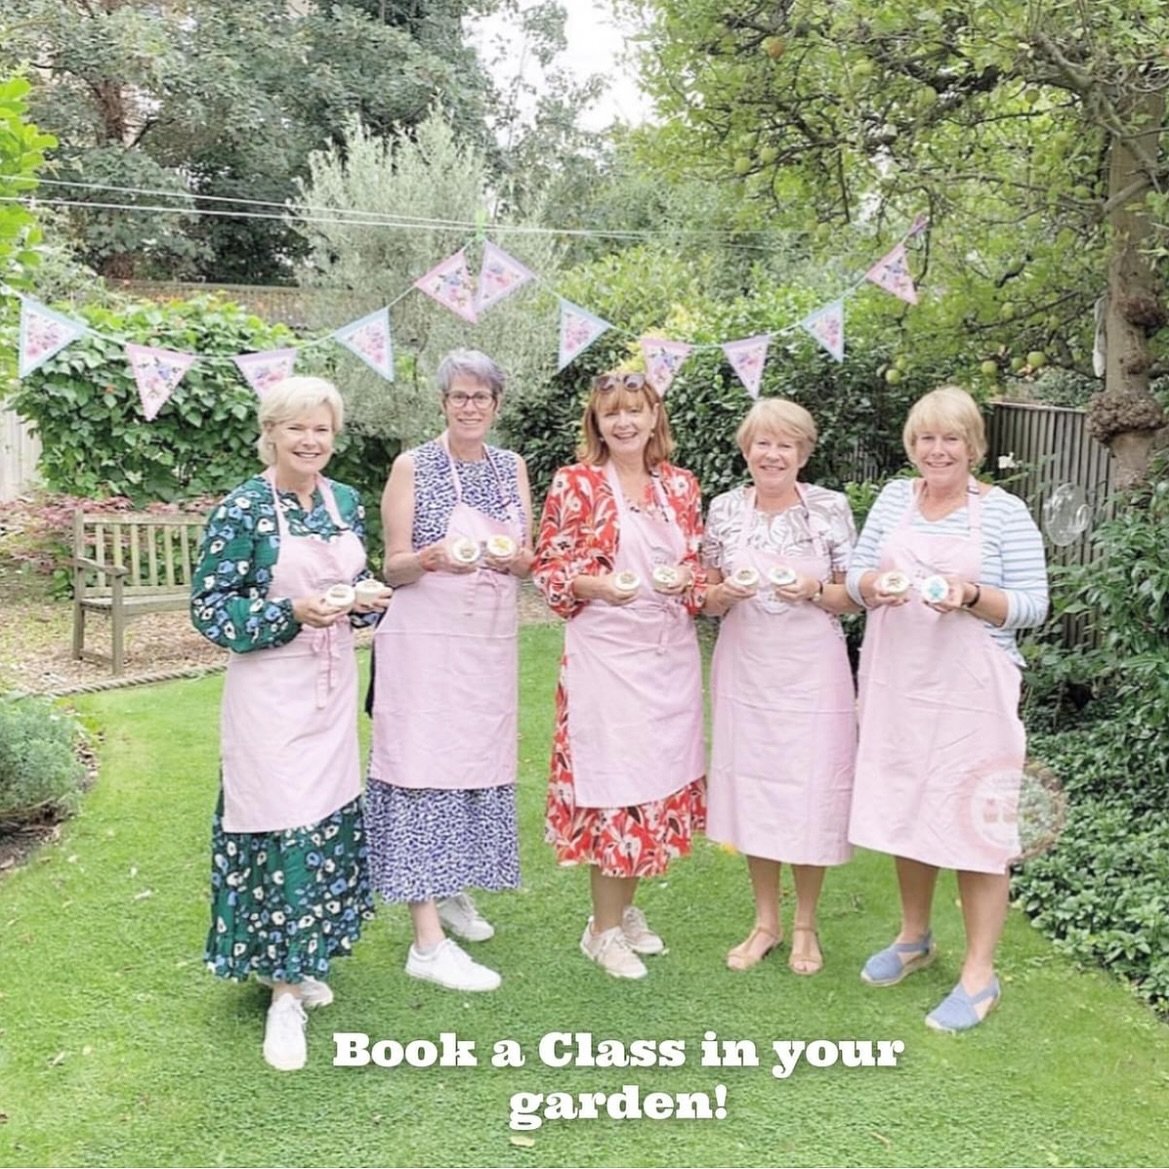 🍃 Invite your friends over for a cupcake decorating class in the garden! Such a lovely way to spend time with friends learning a new skill and having fun!

⭐️ Book at yours at www.ladyberrycupcakes.co.uk 

#FunActivity #FunWithFriends #CupcakeClass 